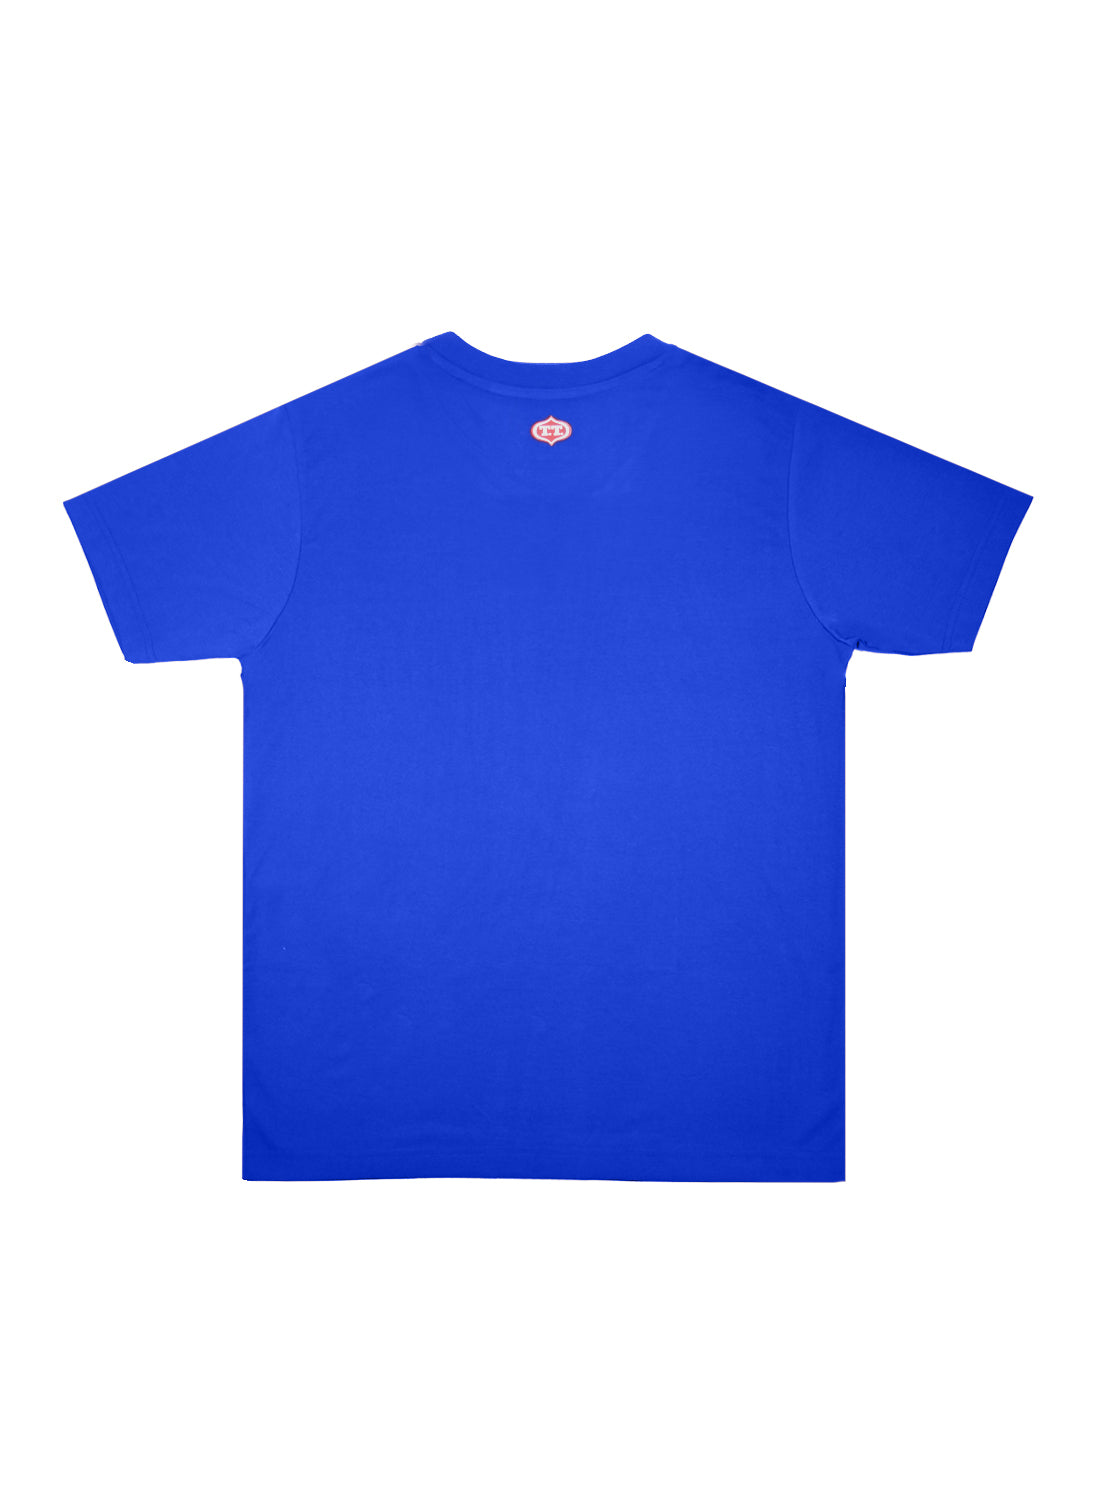 T.T Mens Royal Blue Regular Fit  Poly Jersey Round Neck Half Sleeve T-Shirt